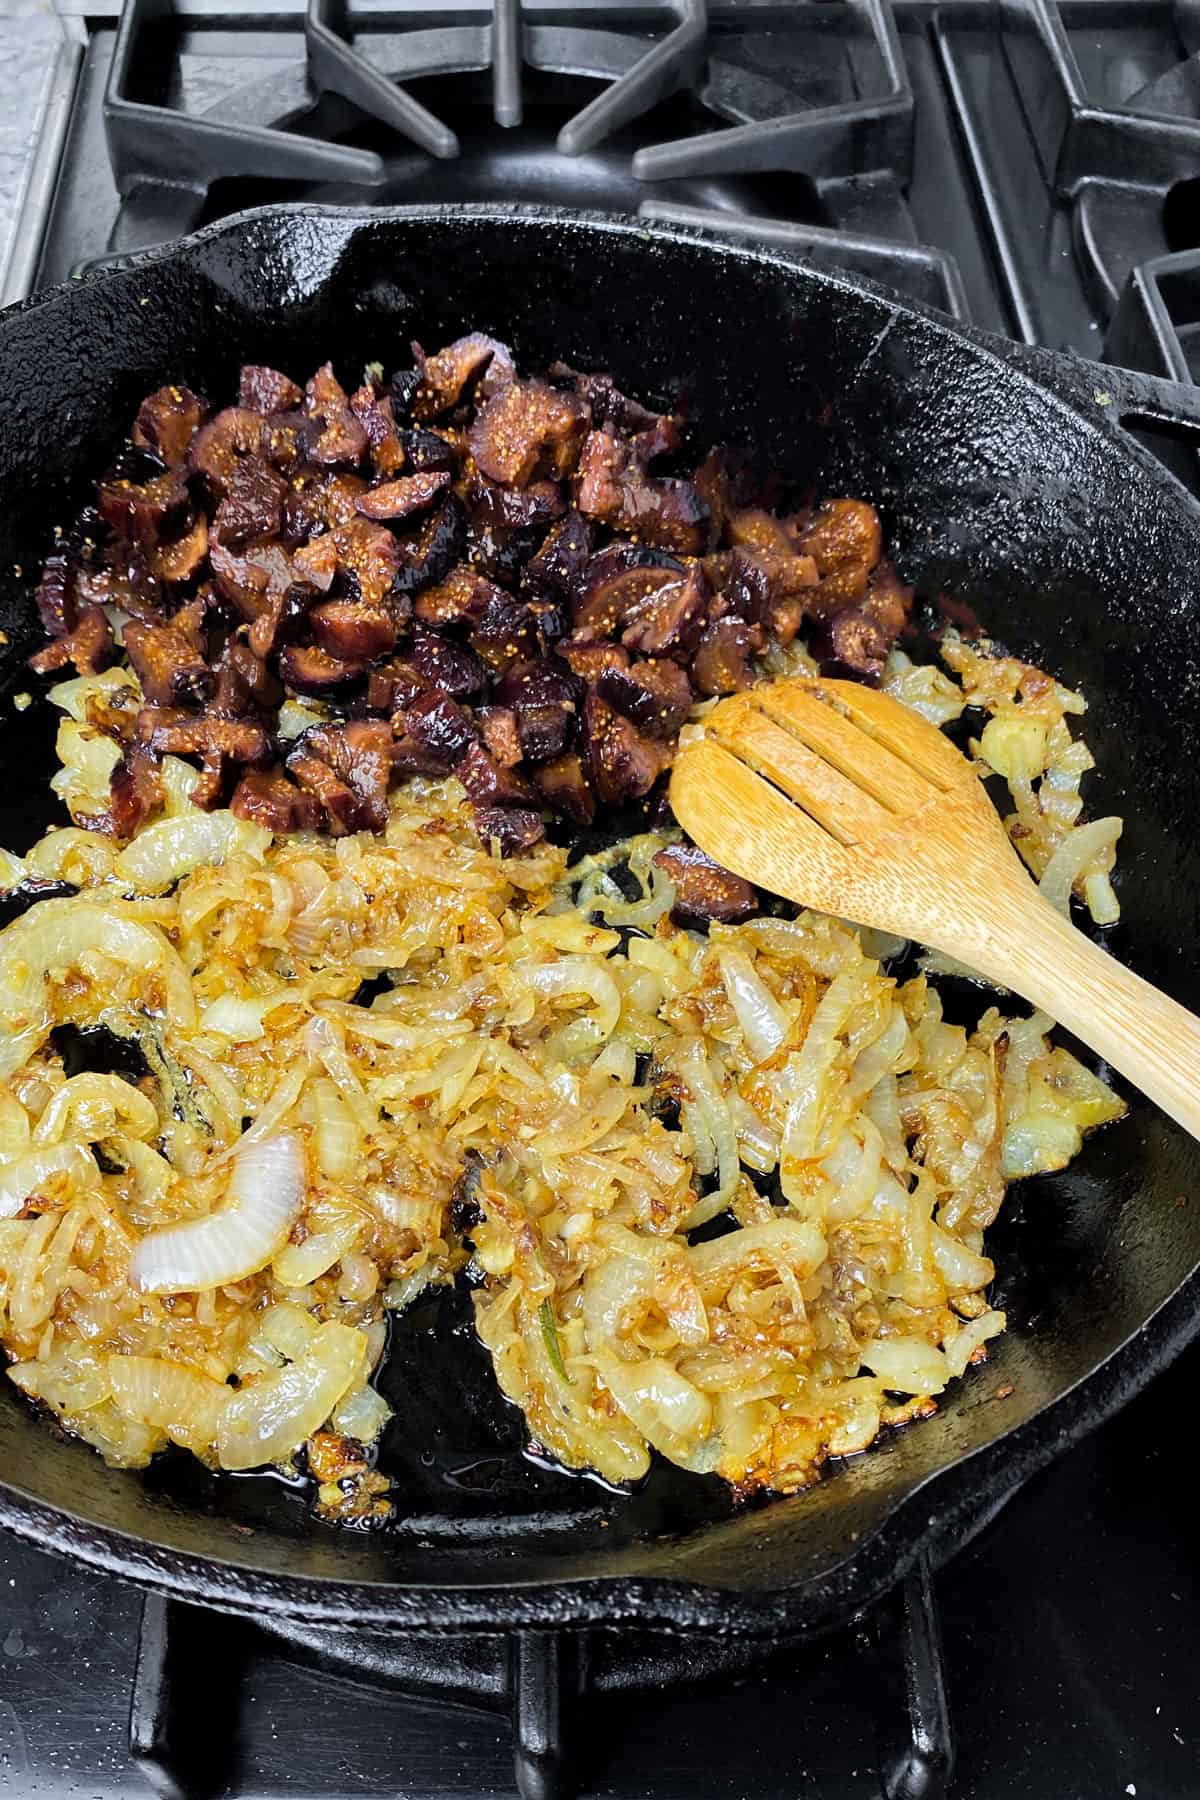 Caramelized onions and chopped figs in a cast iron skilelt